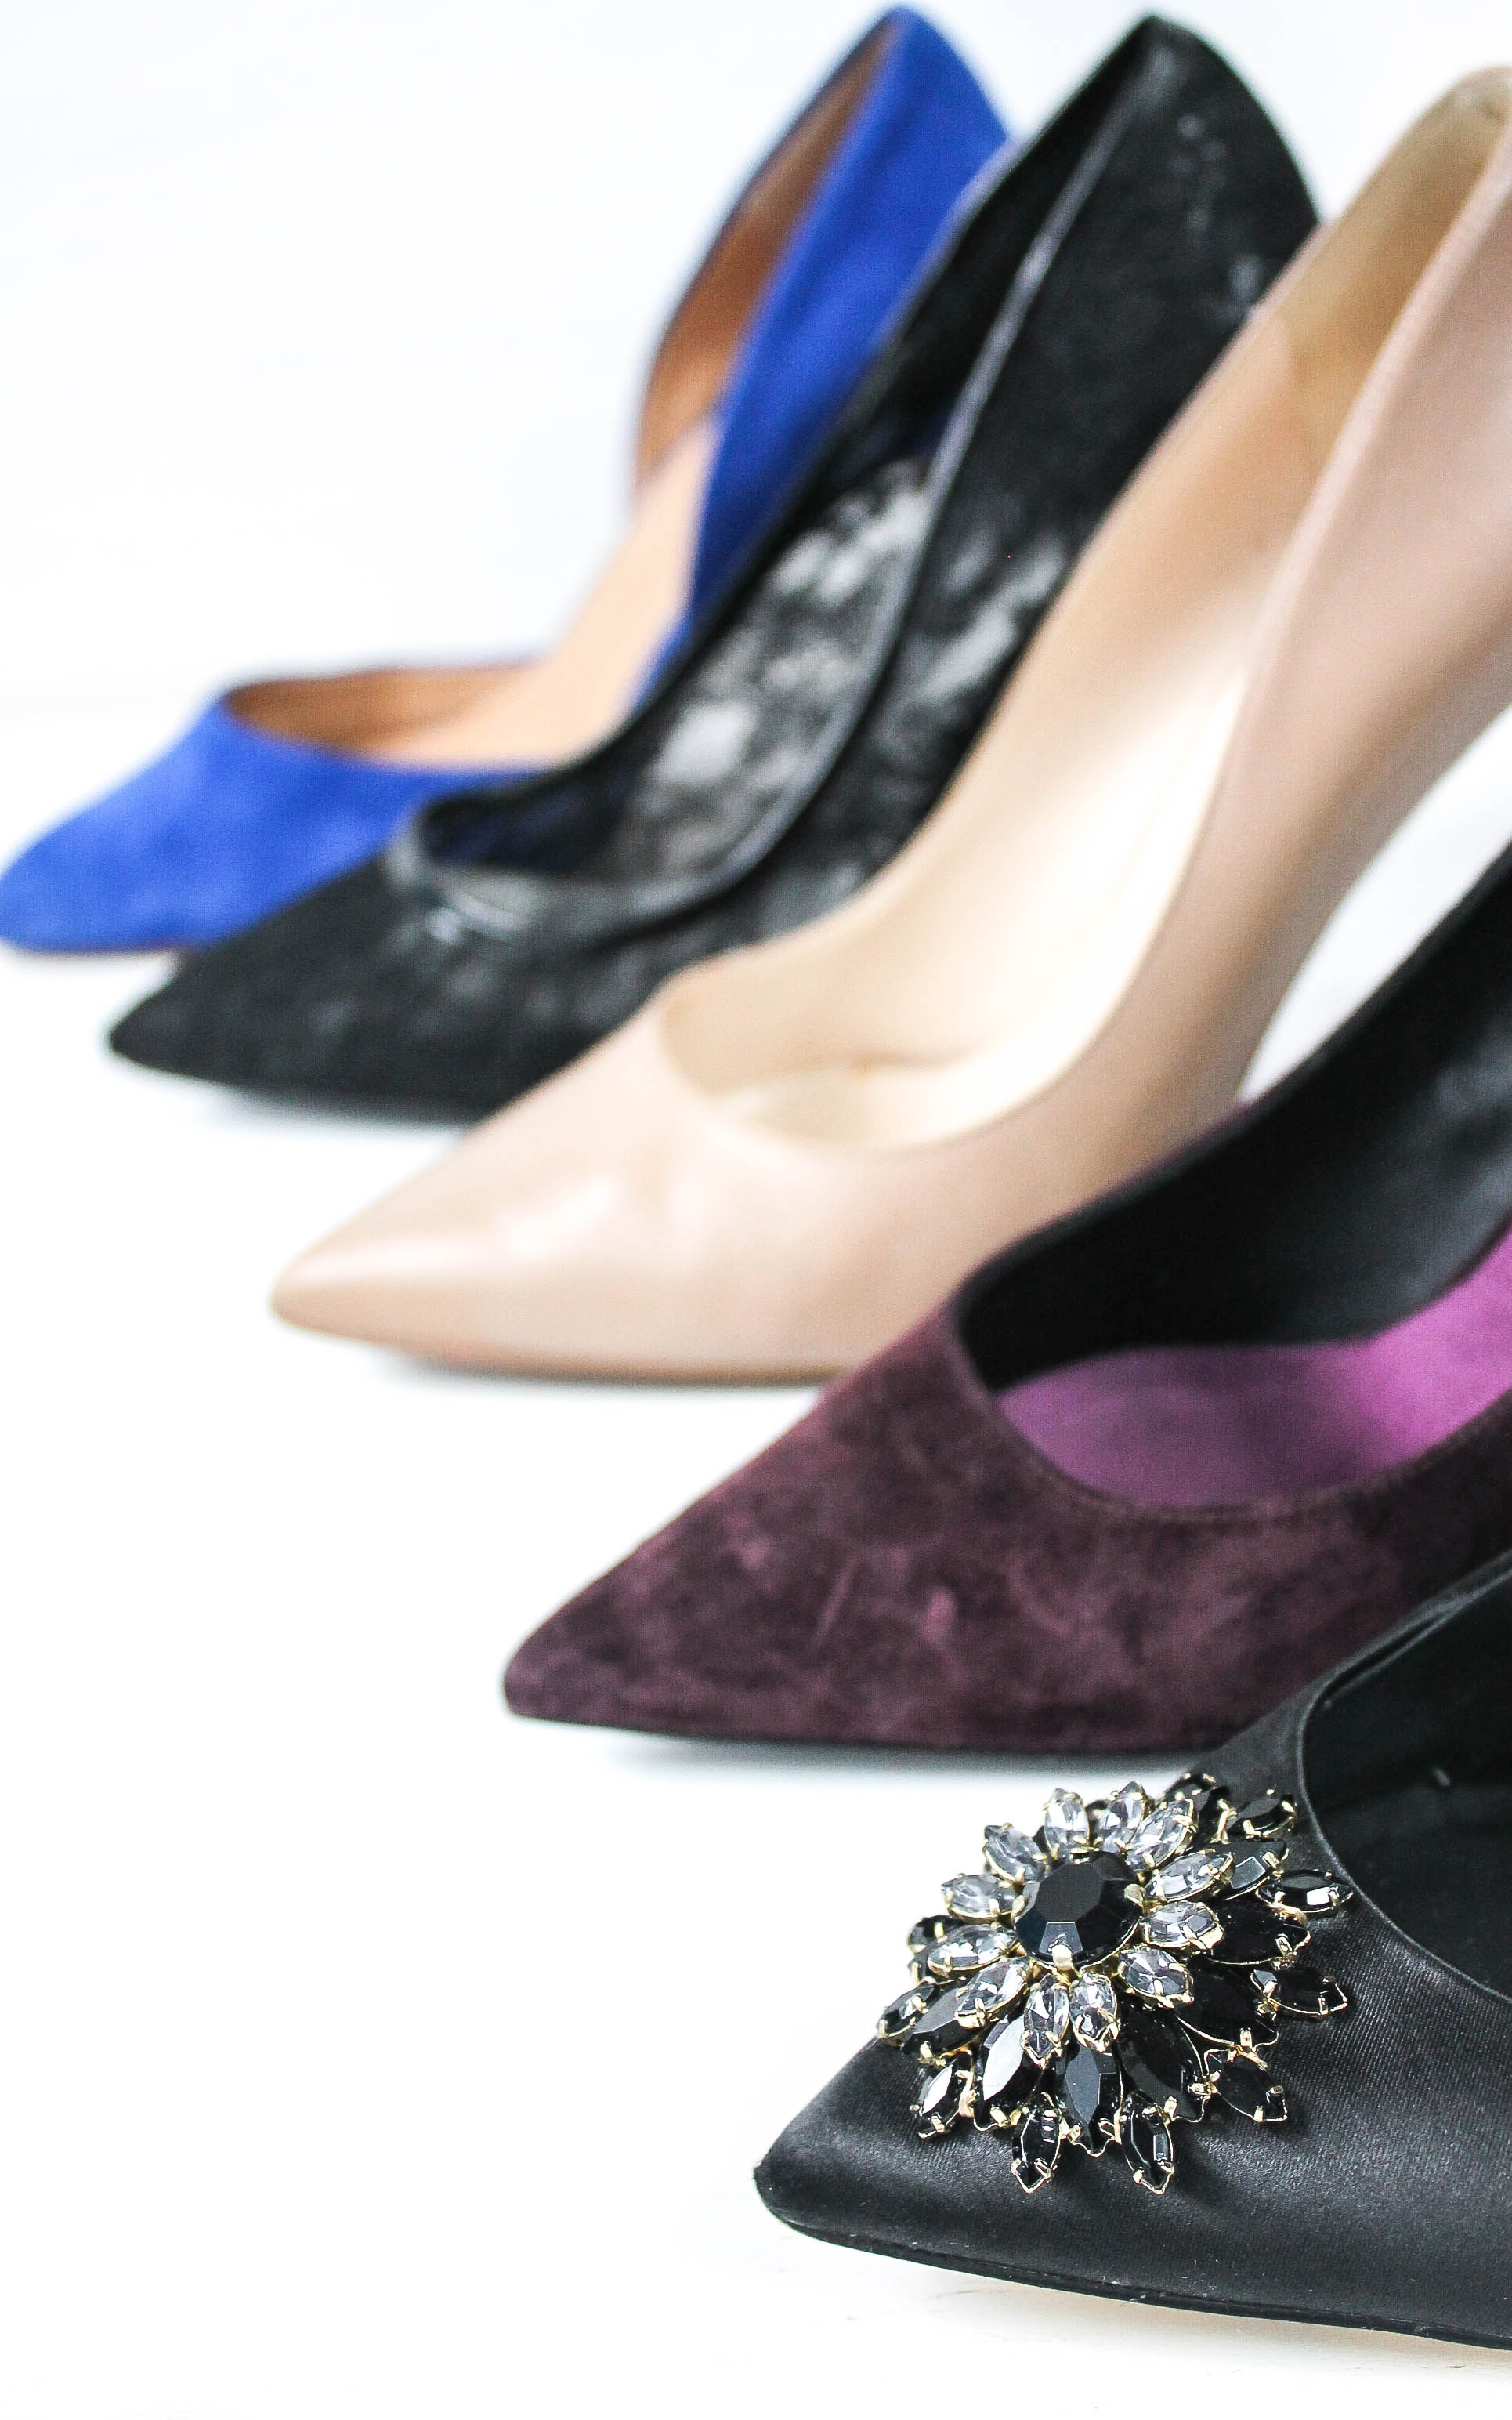 16 Different Types of High Heel Shoes Every Woman Should Own